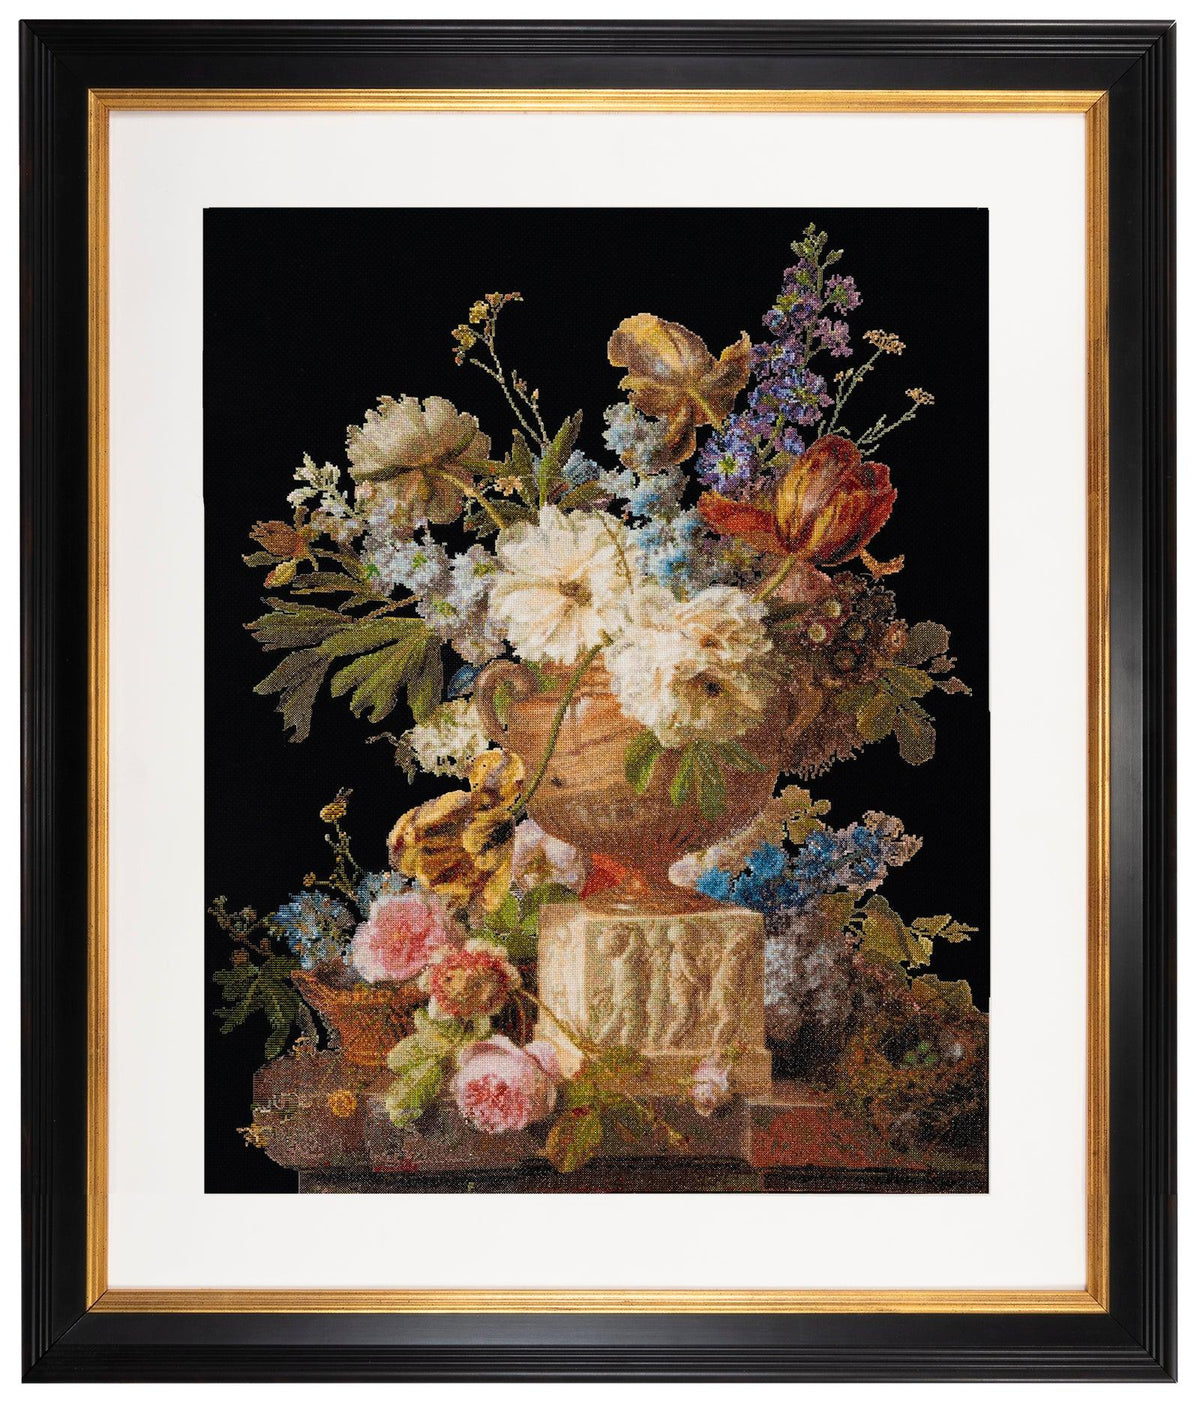 Thea Gouverneur - Counted Cross Stitch Kit - Flower Still-life with an Alabaster Vase - Aida Black - 18 count - 580.05 - Thea Gouverneur Since 1959